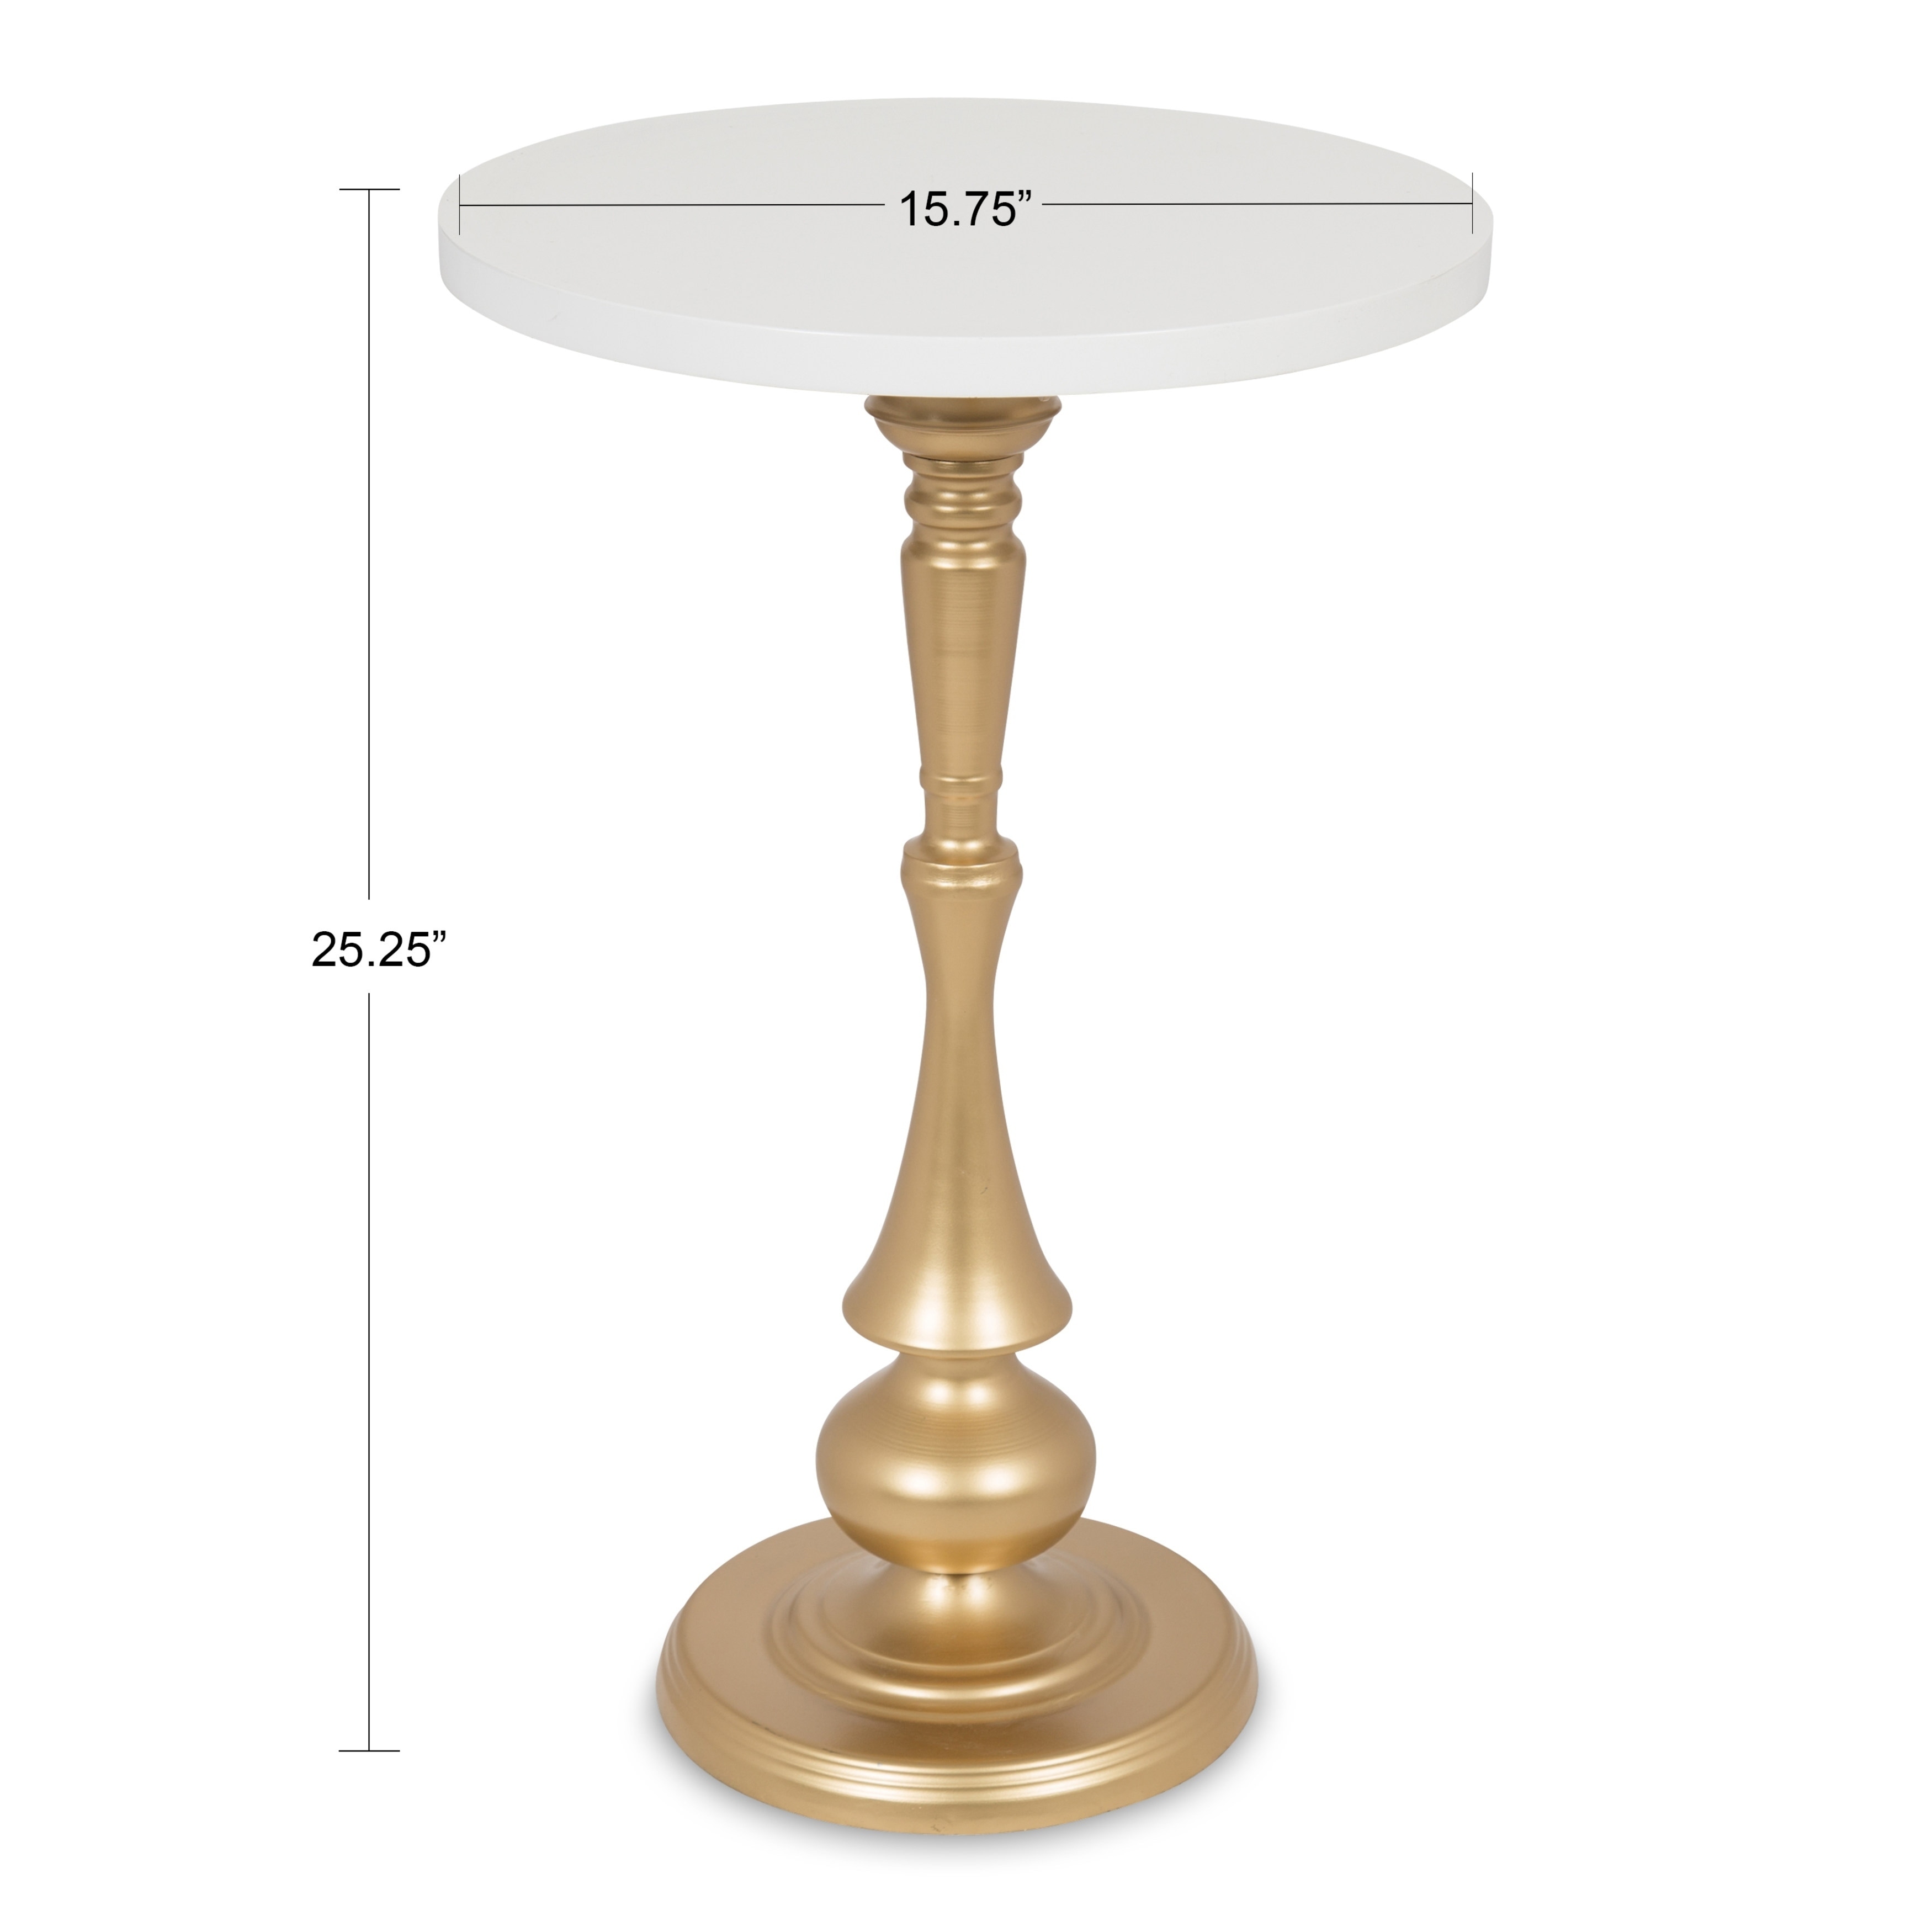 kate and laurel regina round metal wood pedestal accent table free shipping today zinc side inches high behind sofa bar mirror effect bedside tables pottery barn legs hairpin